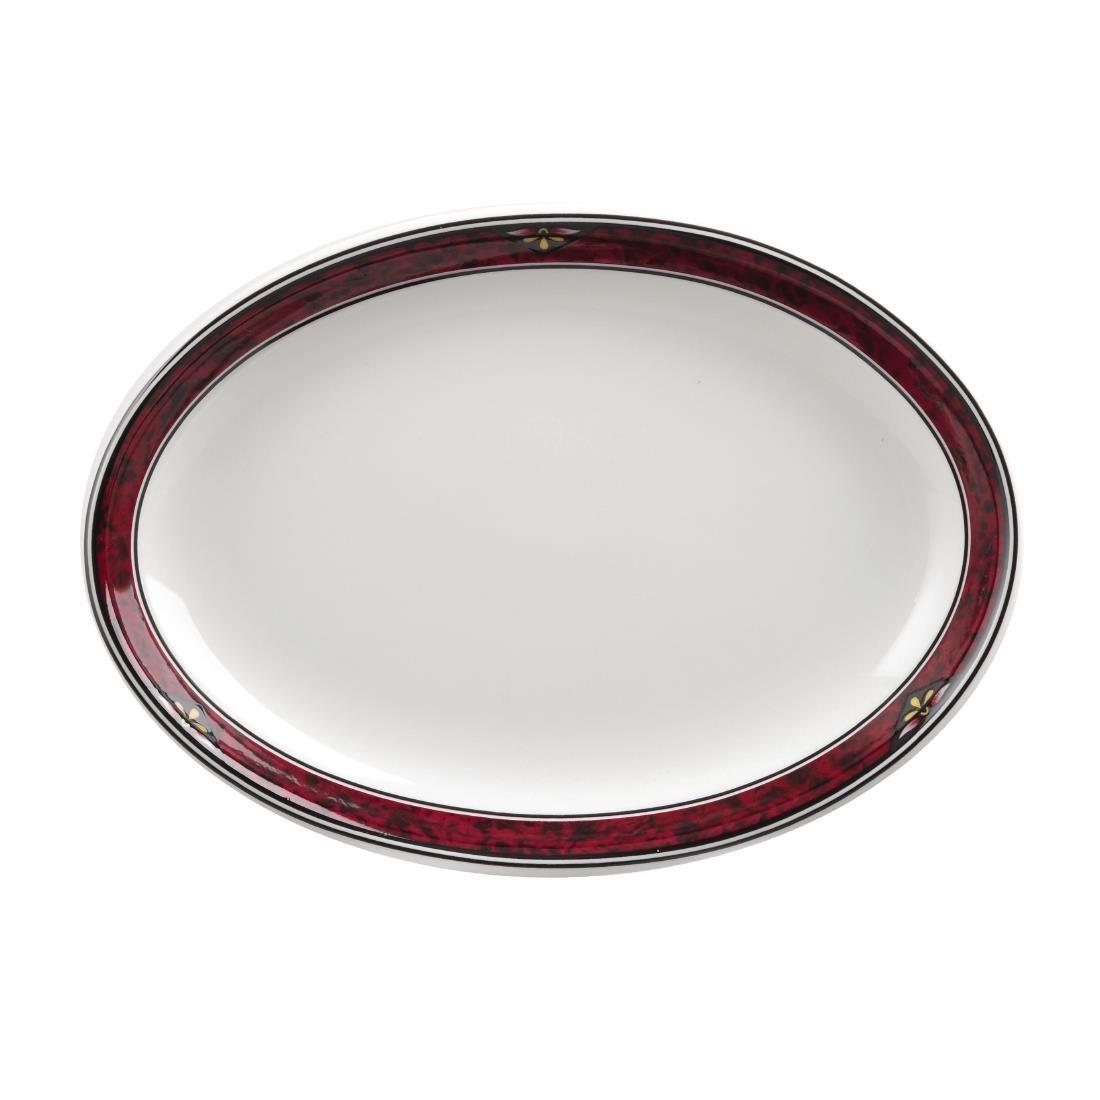 Churchill Milan Oval Platters 202mm (Pack of 12) - M767  - 1